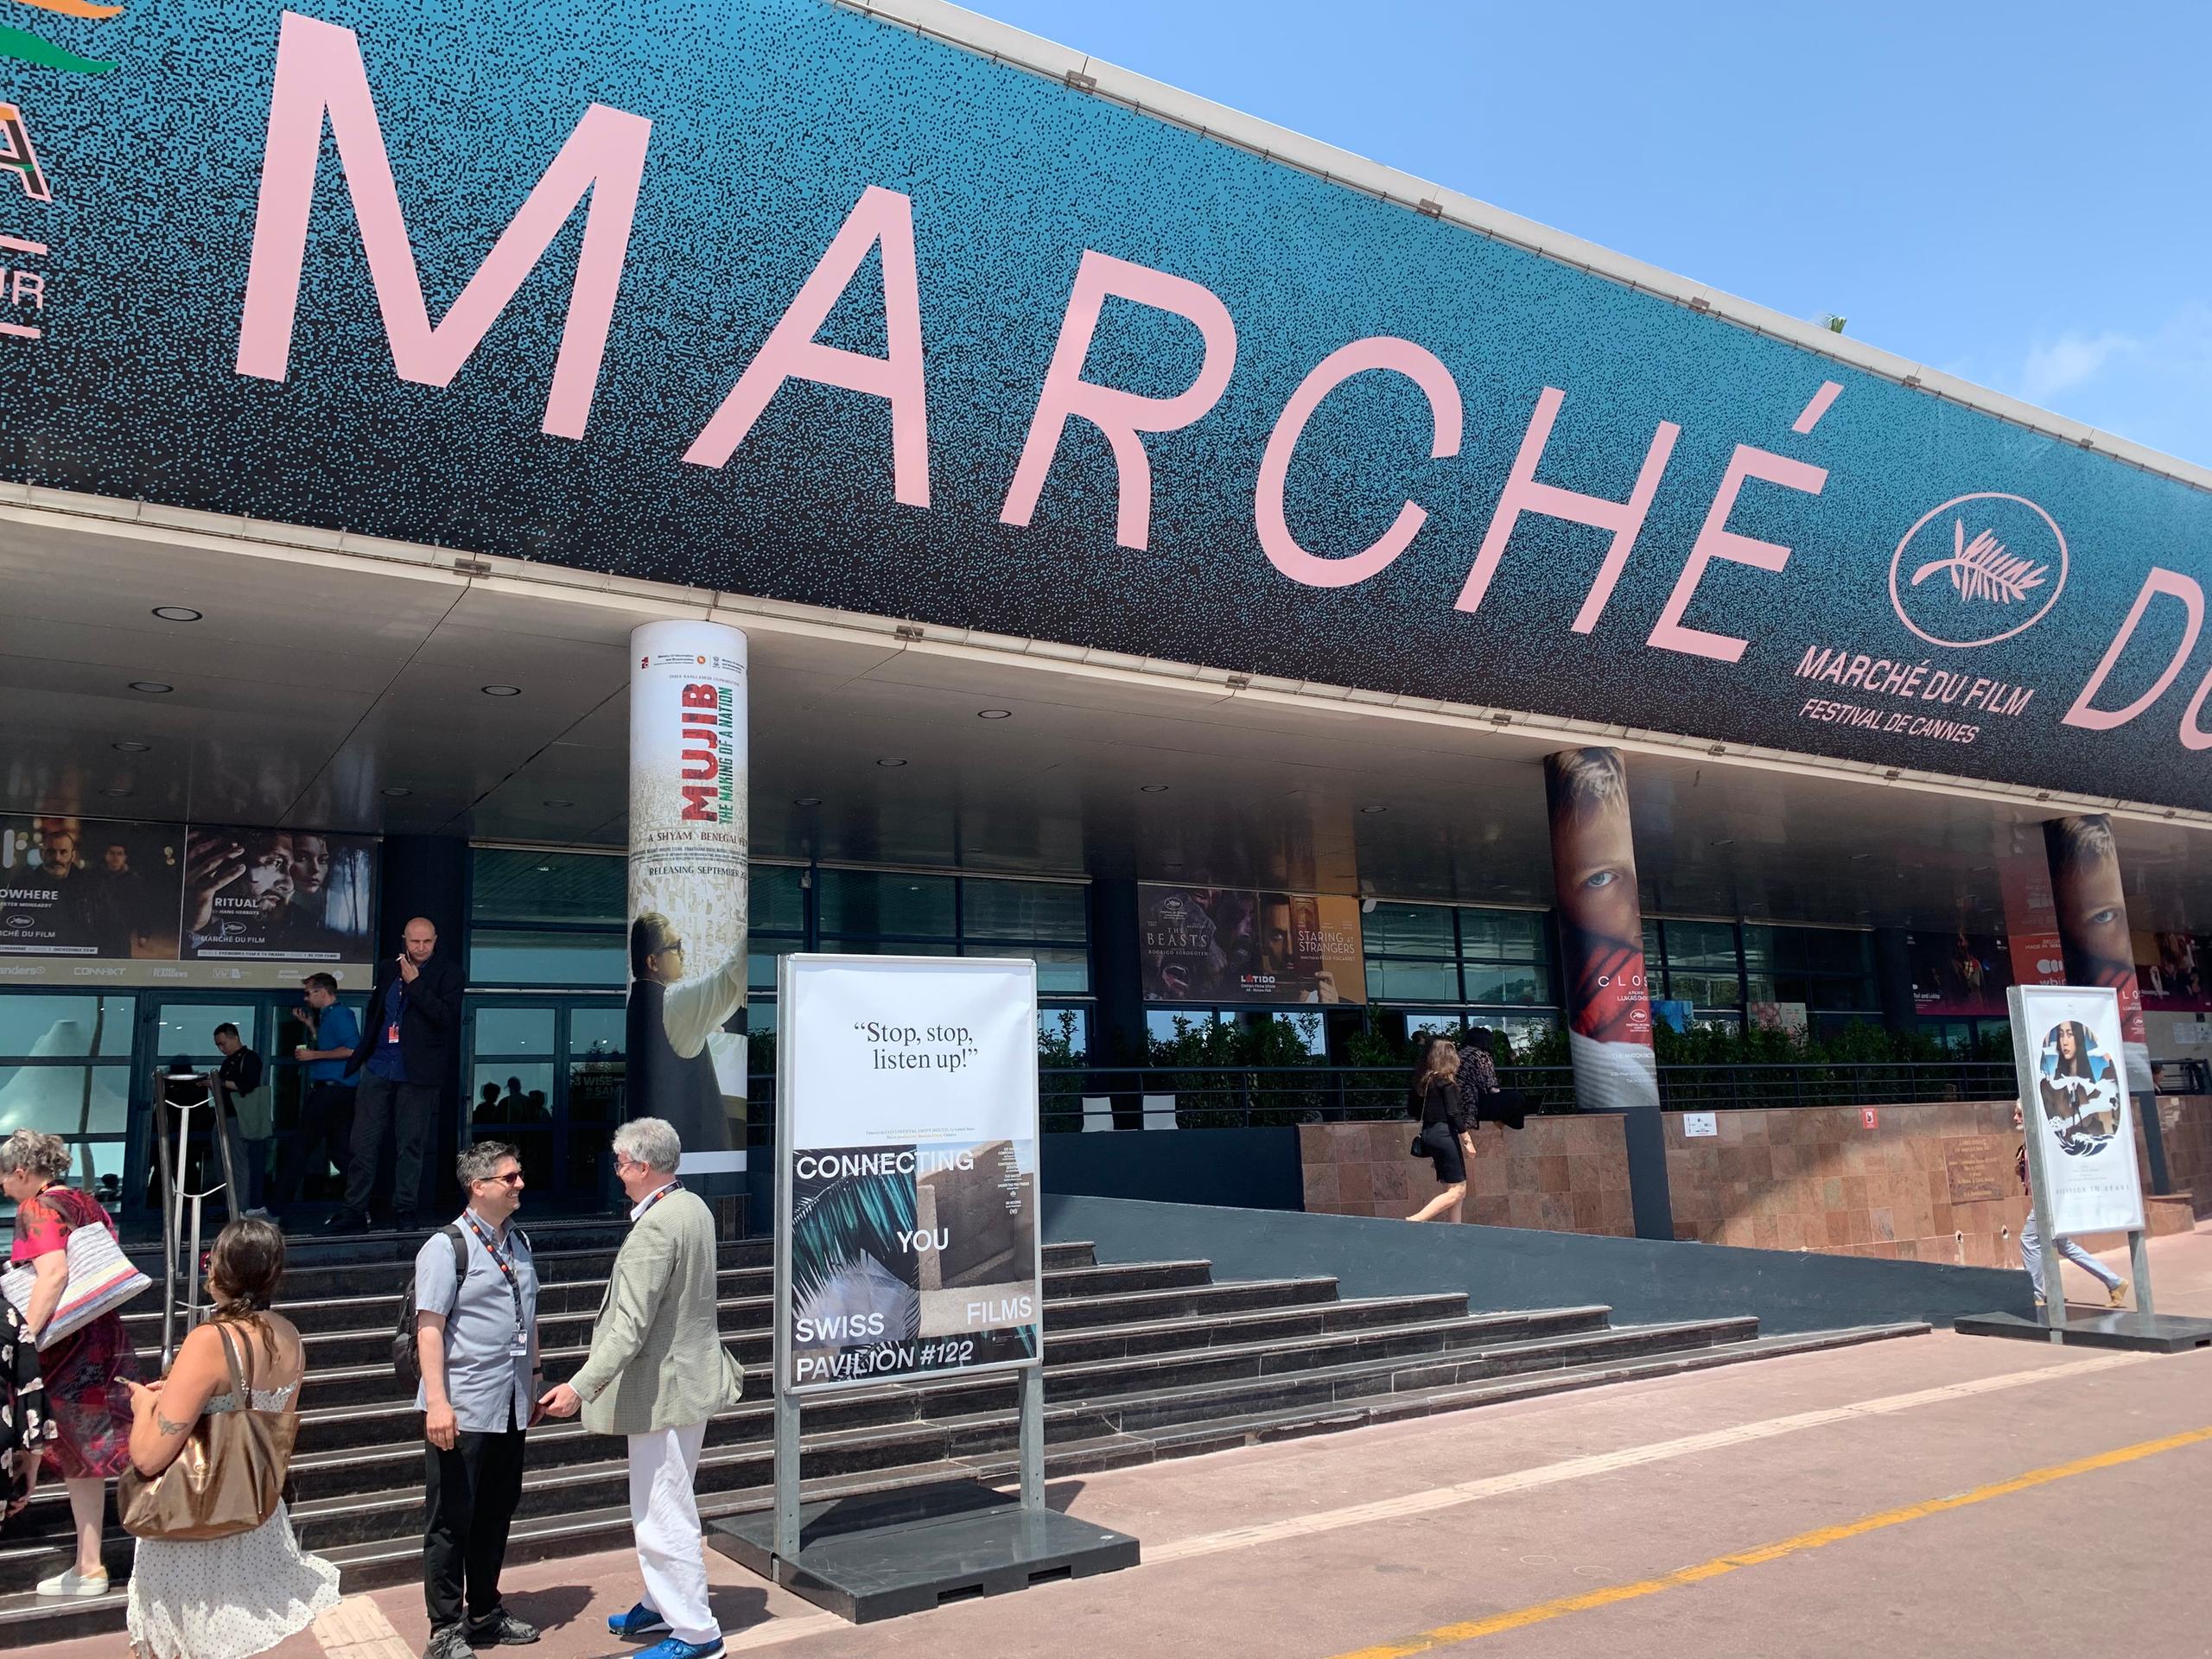 Entrance to the Marché du Film in Cannes